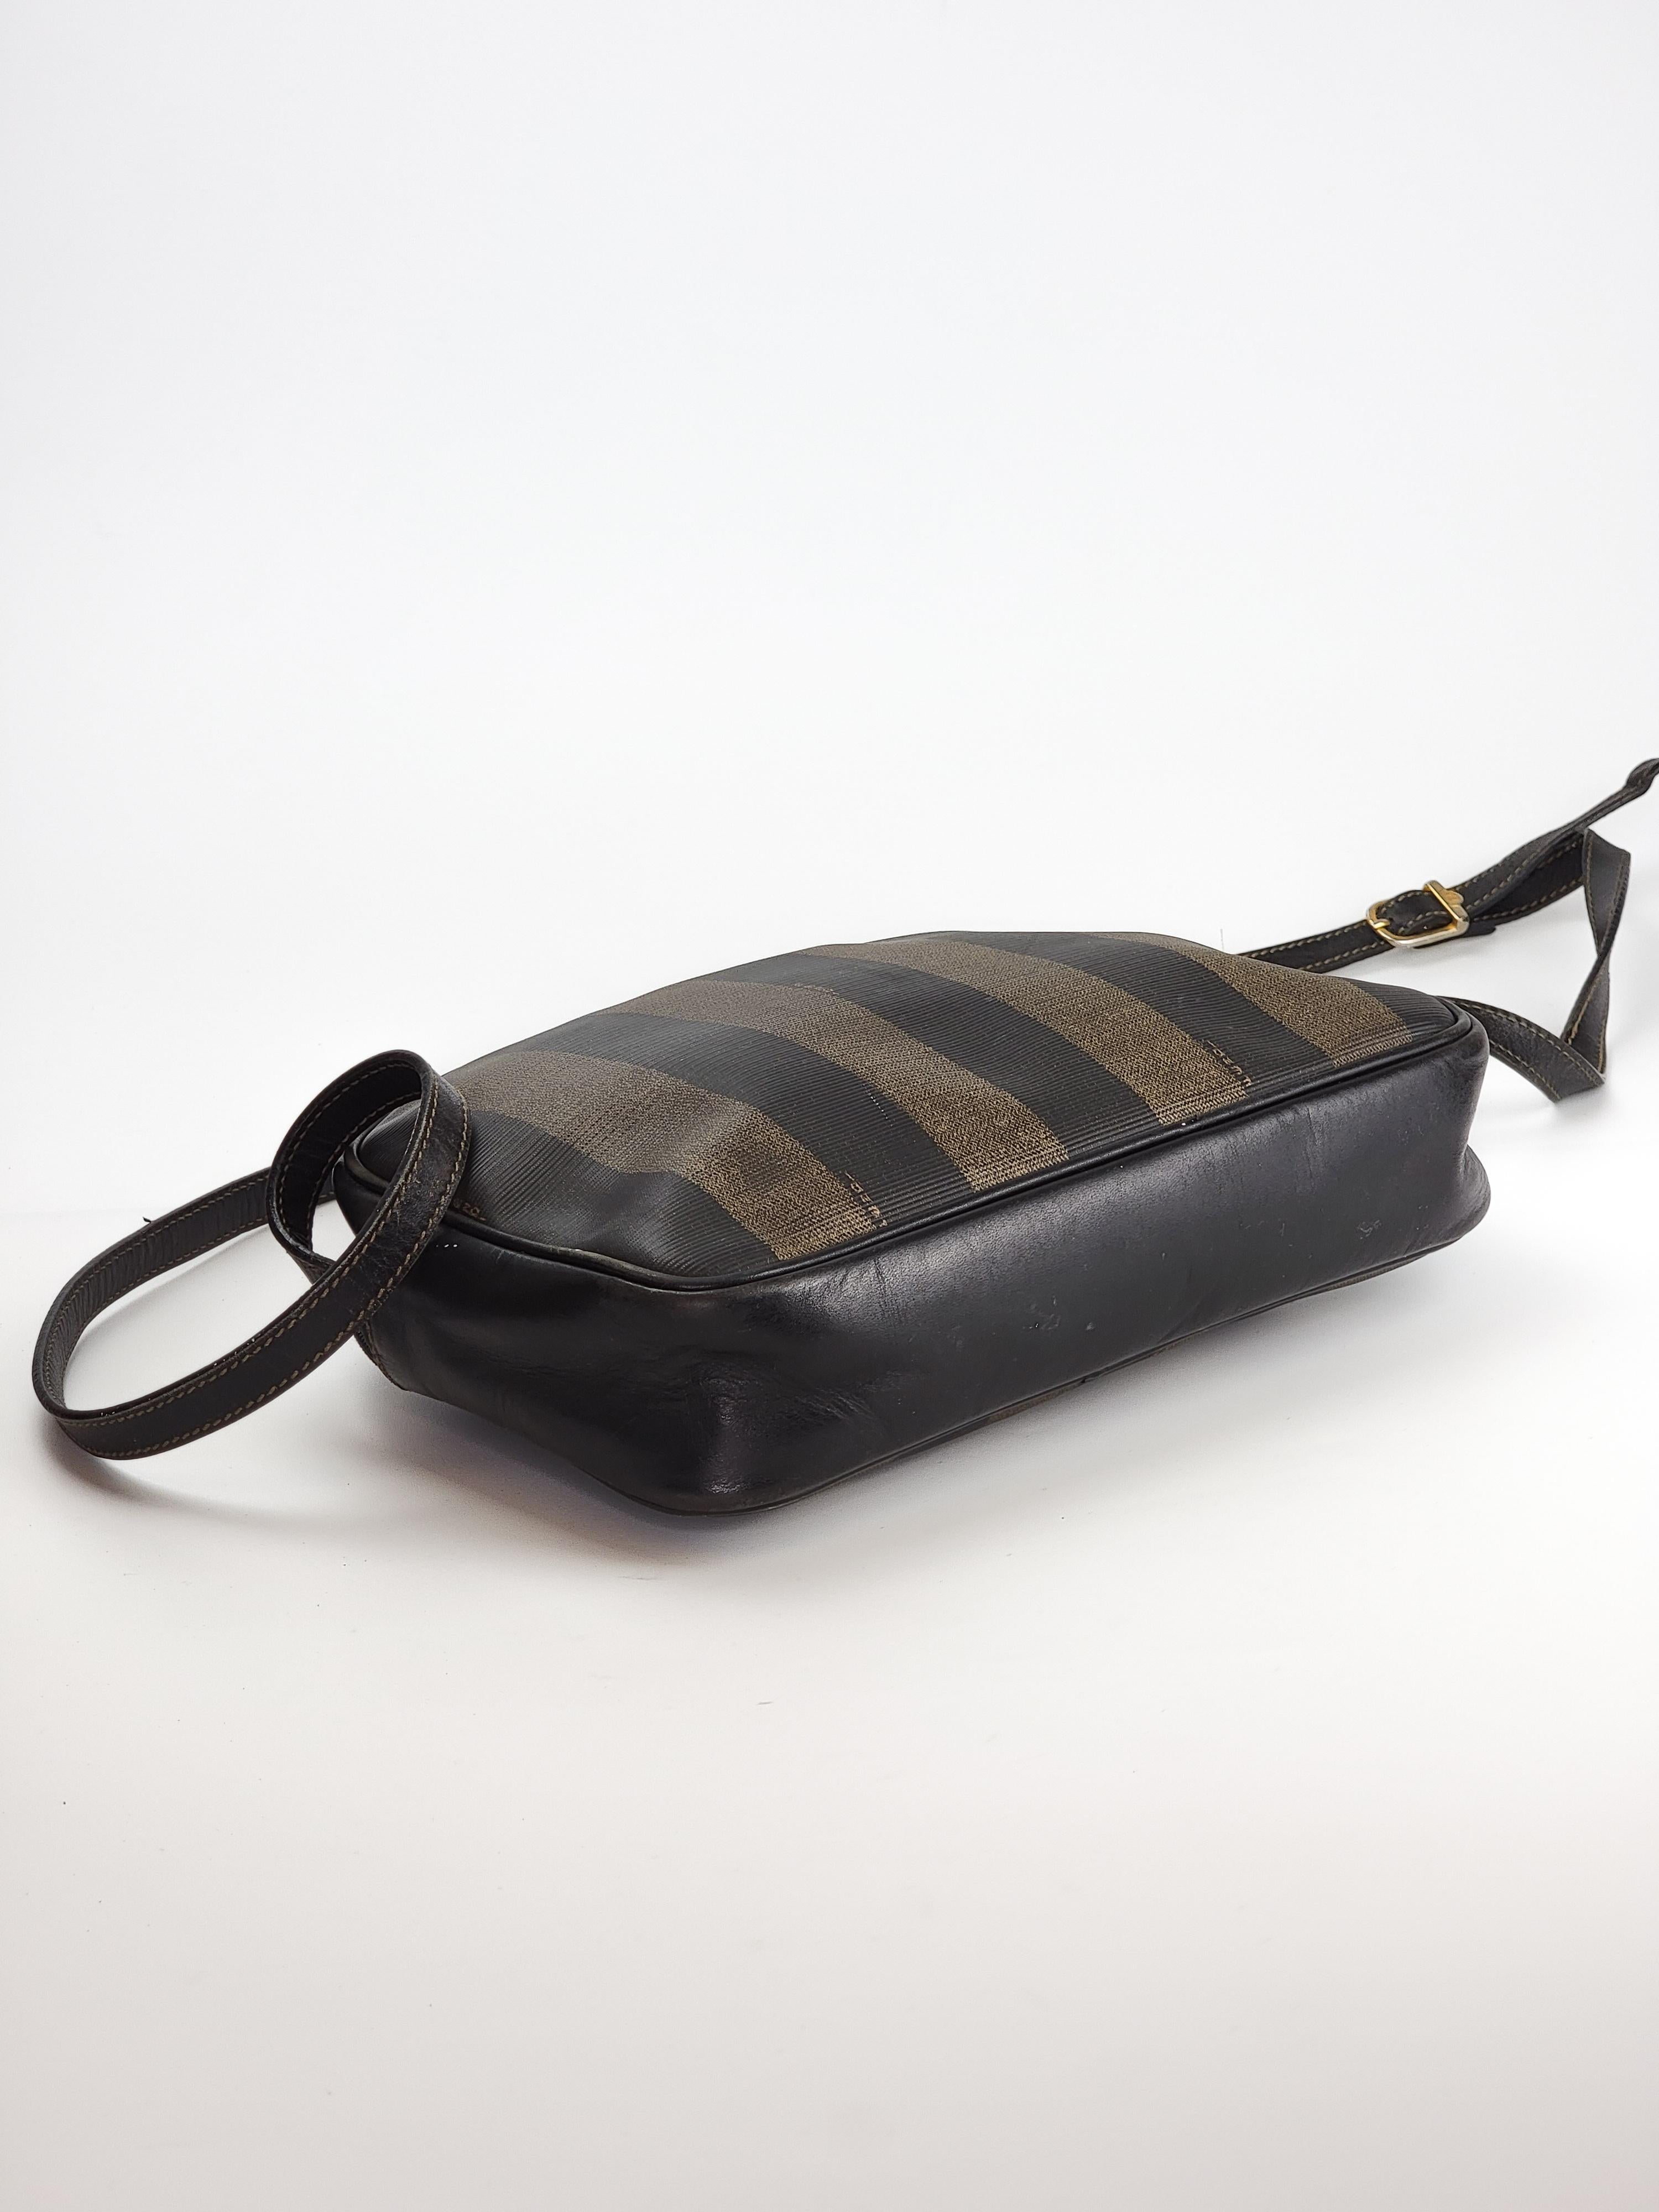 This vintage Fendi Pequin striped camera bag is made of brown and black coated canvas with an adjustable shoulder strap made of genuine black leather. This bag features an external pocket with the embossed Fendi logo on the front, which is also